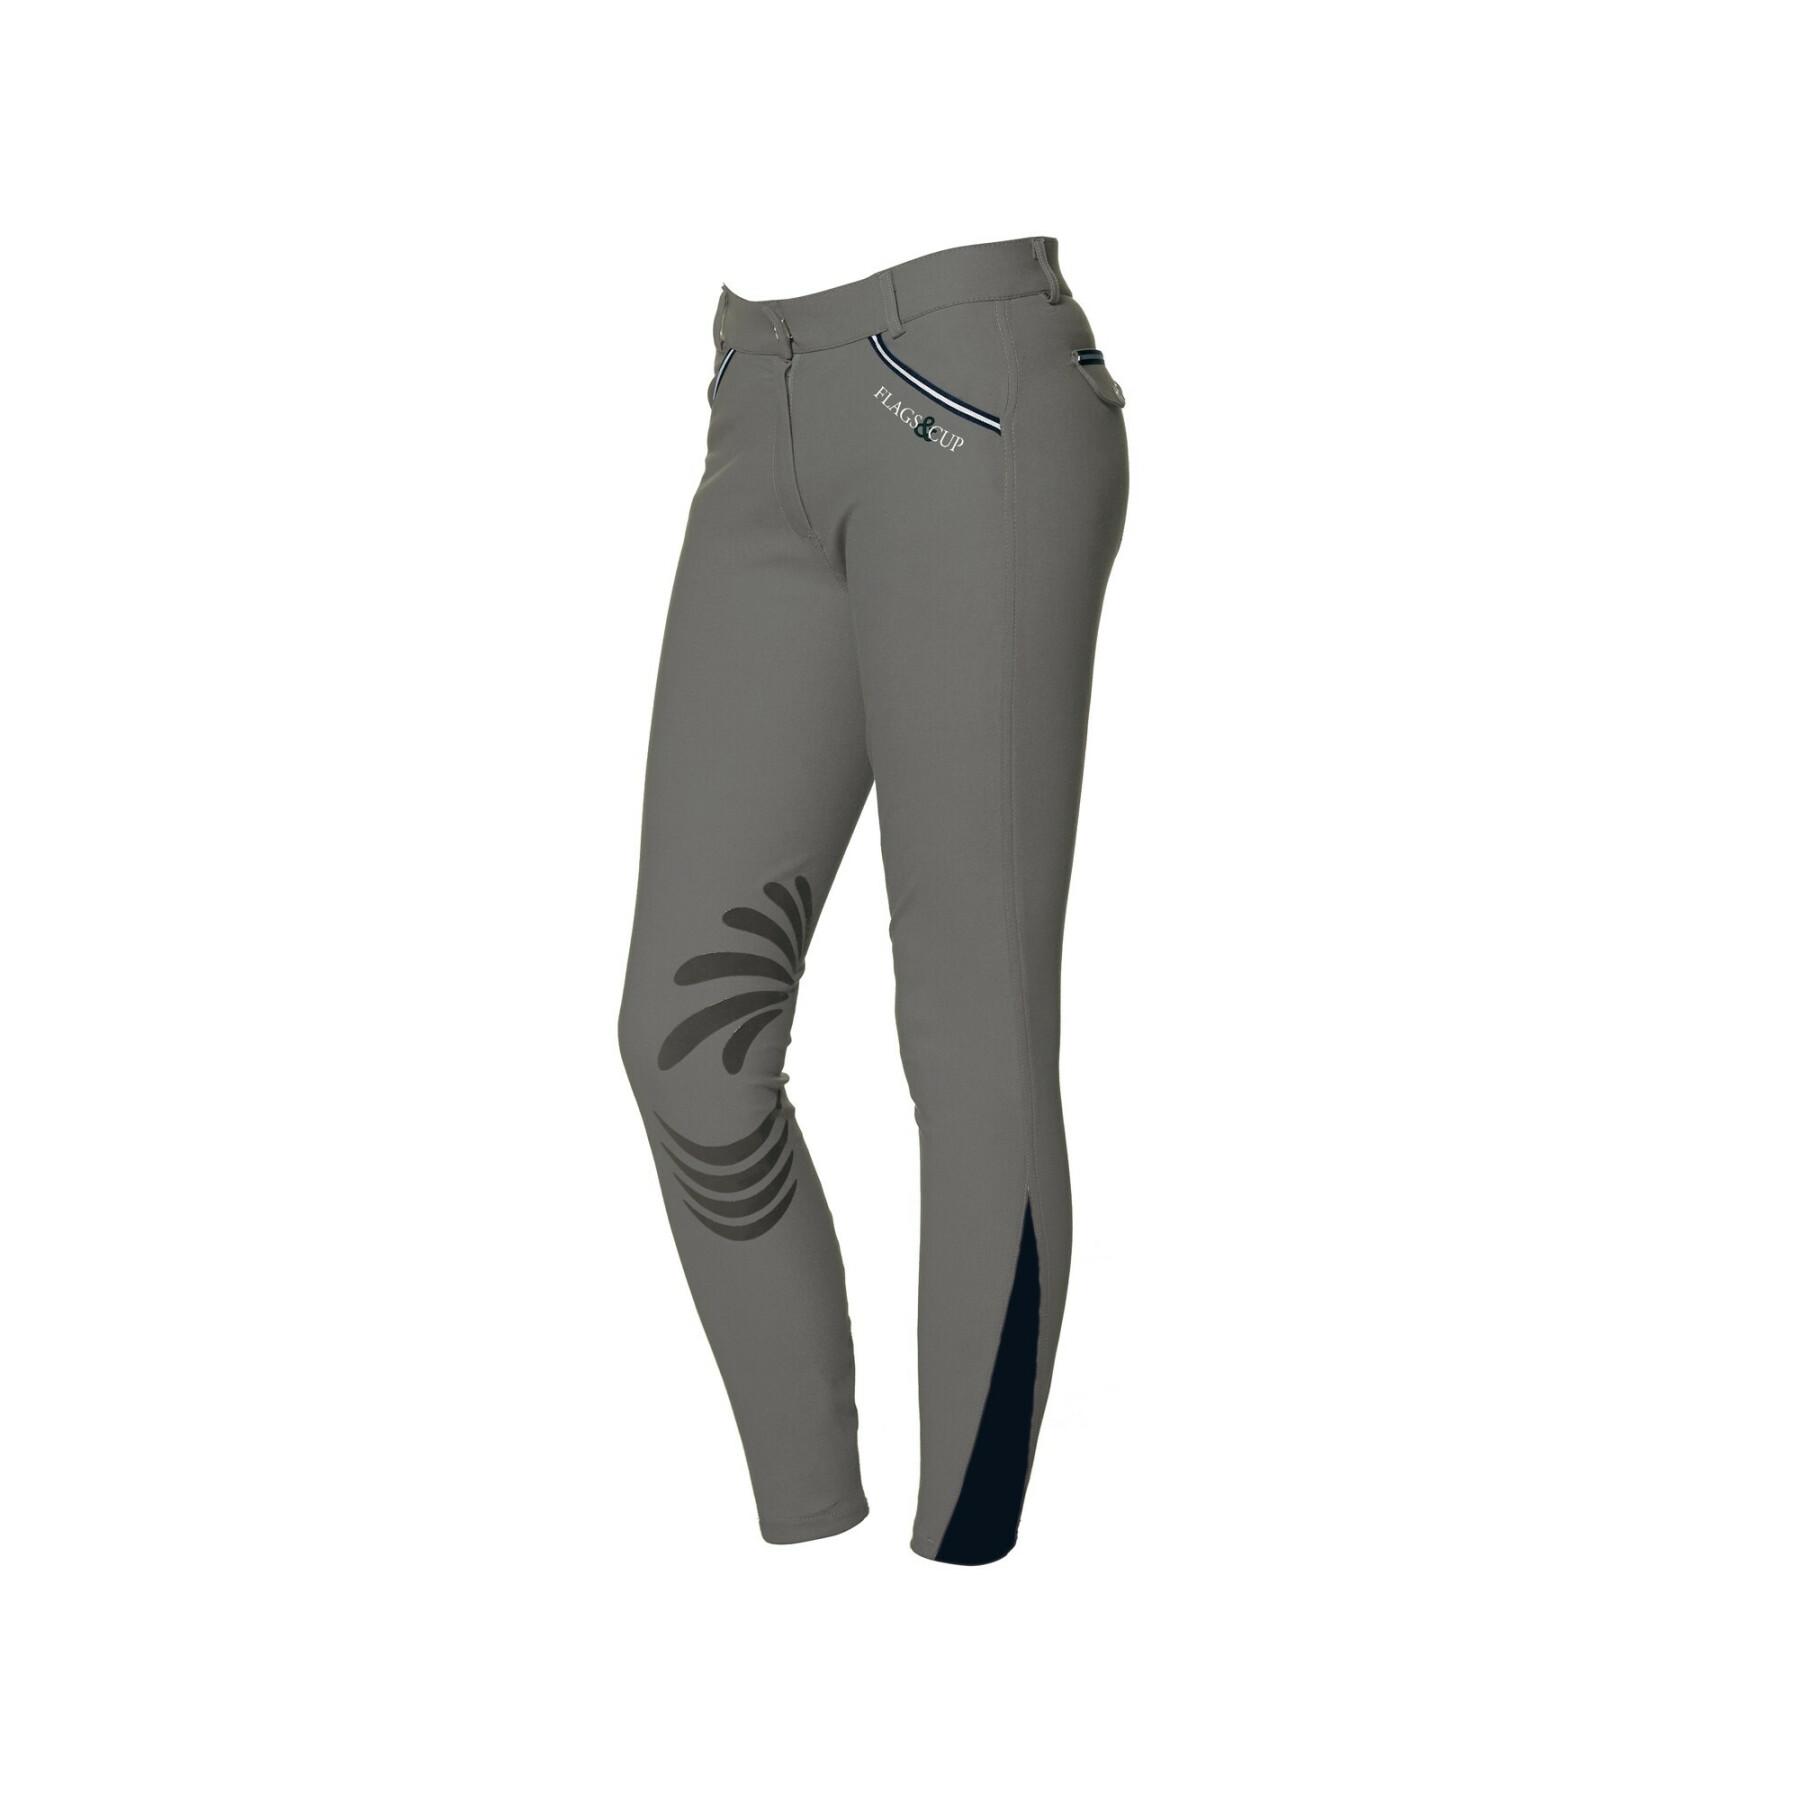 Women's riding pants Flags&Cup Cayenne - Pants - Women - Riders